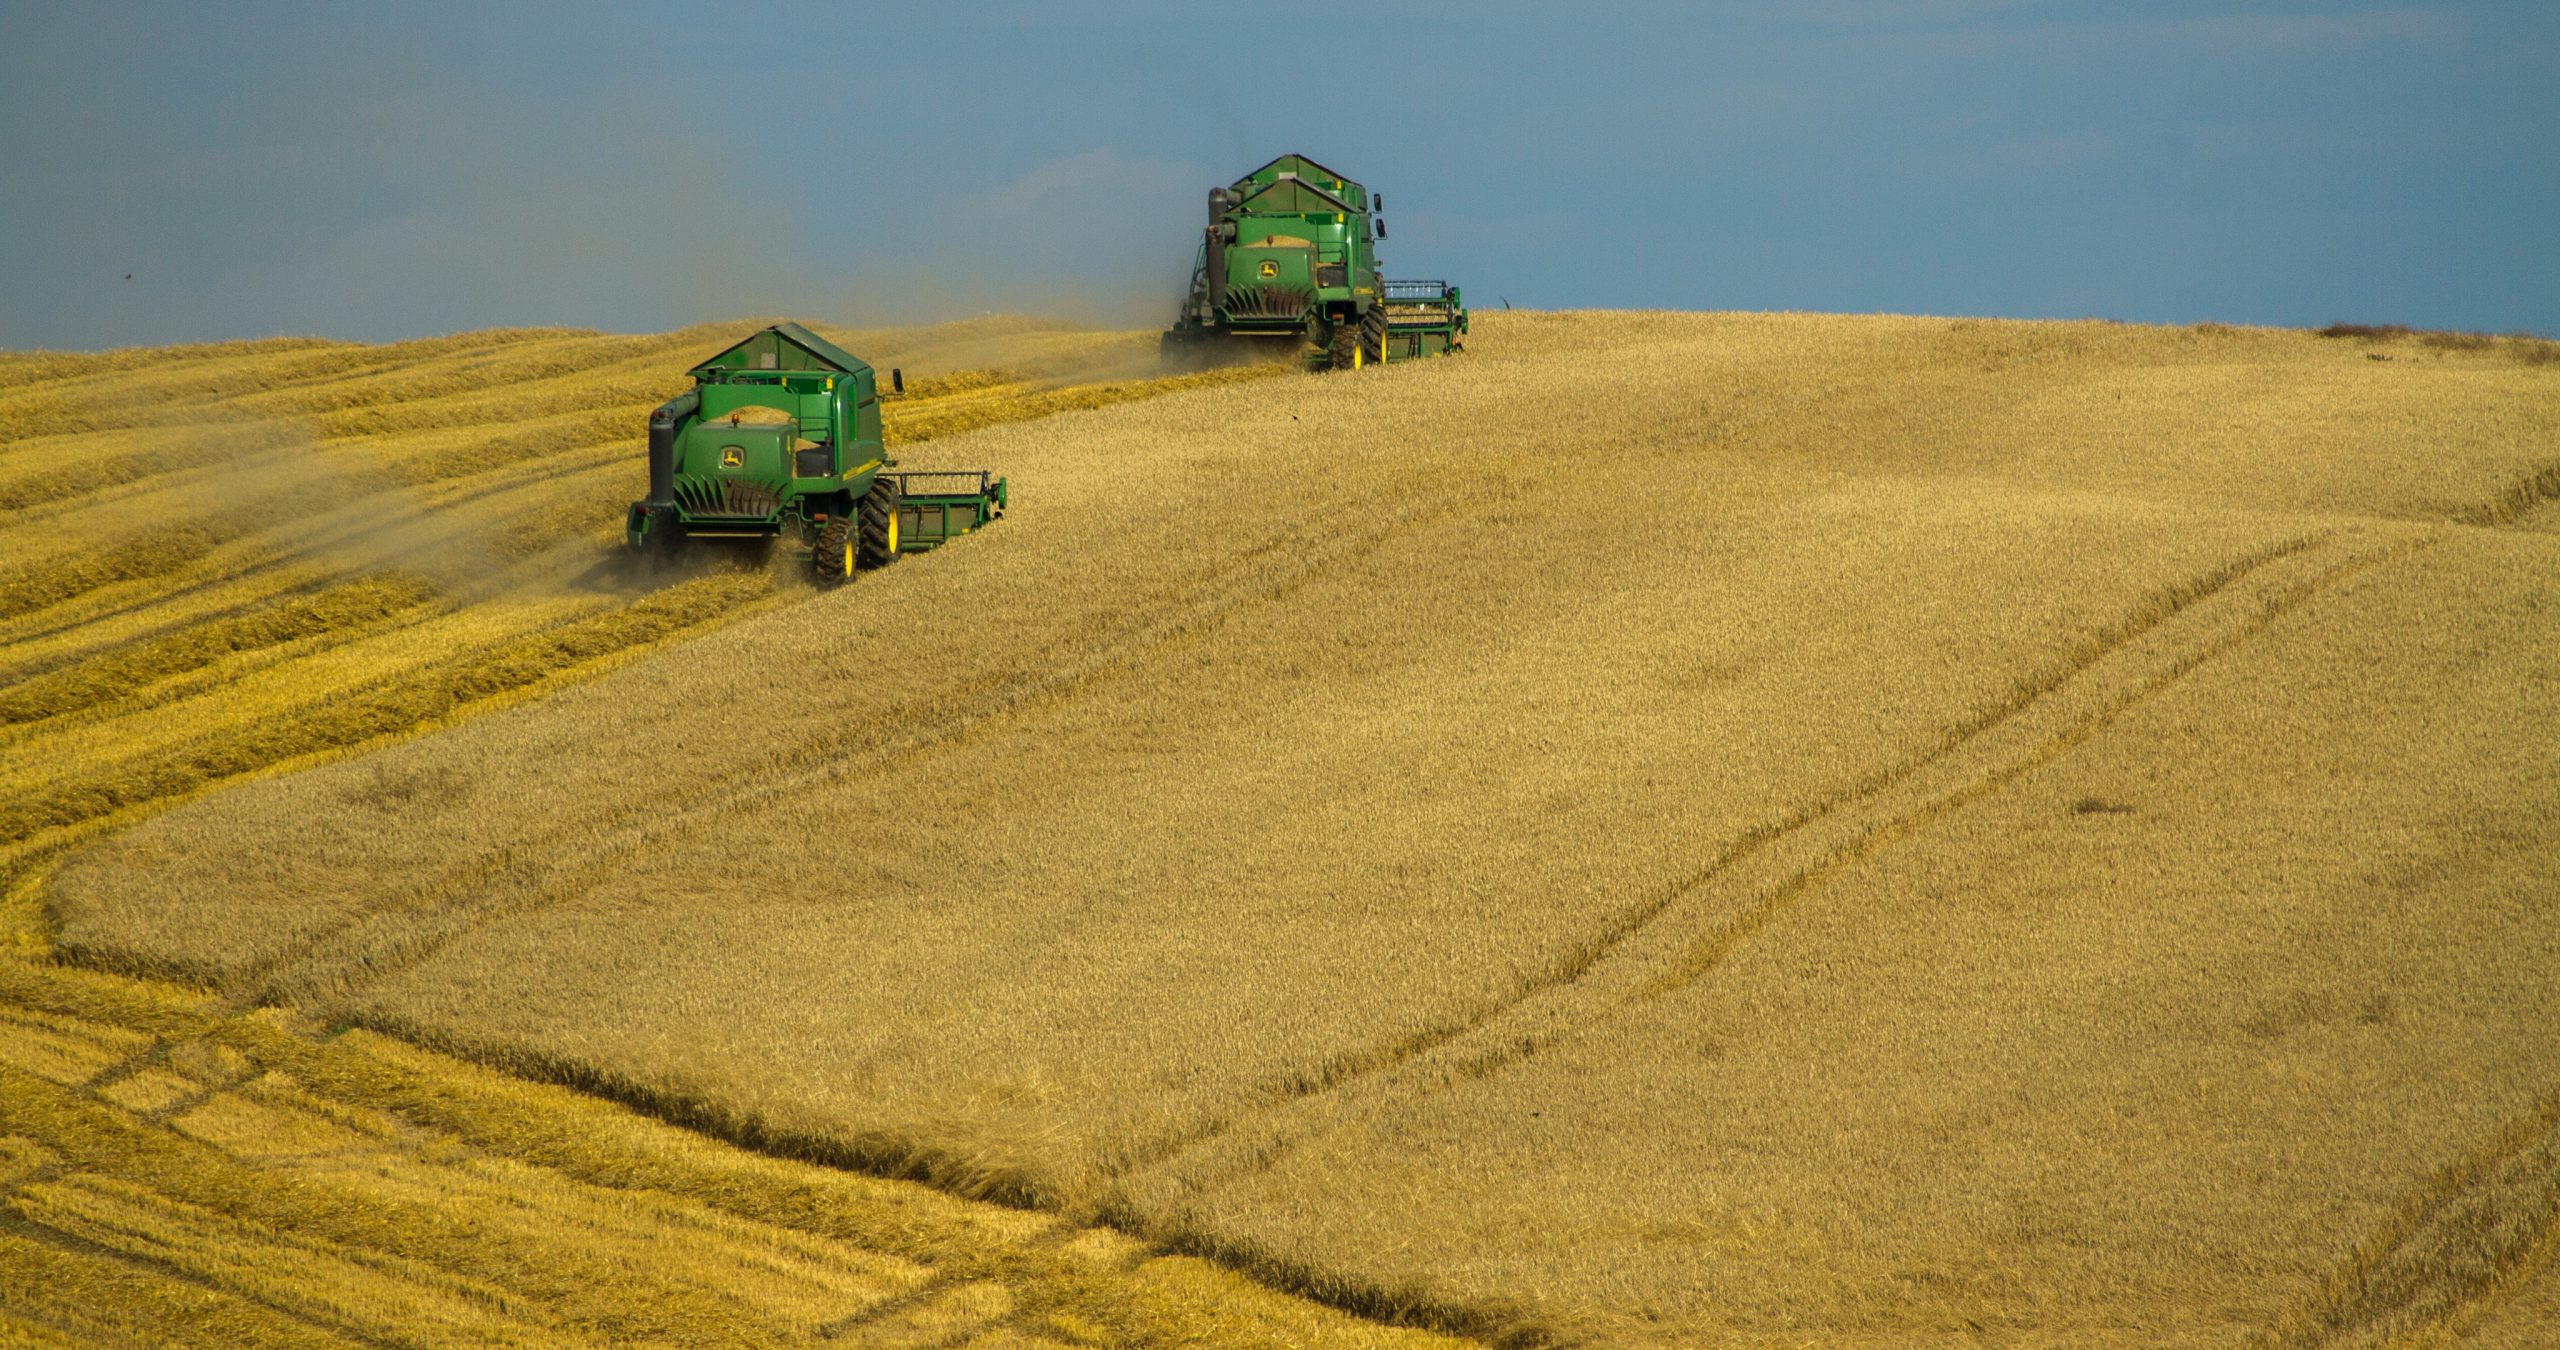 Ban on Grain from Ukraine Remains in Force